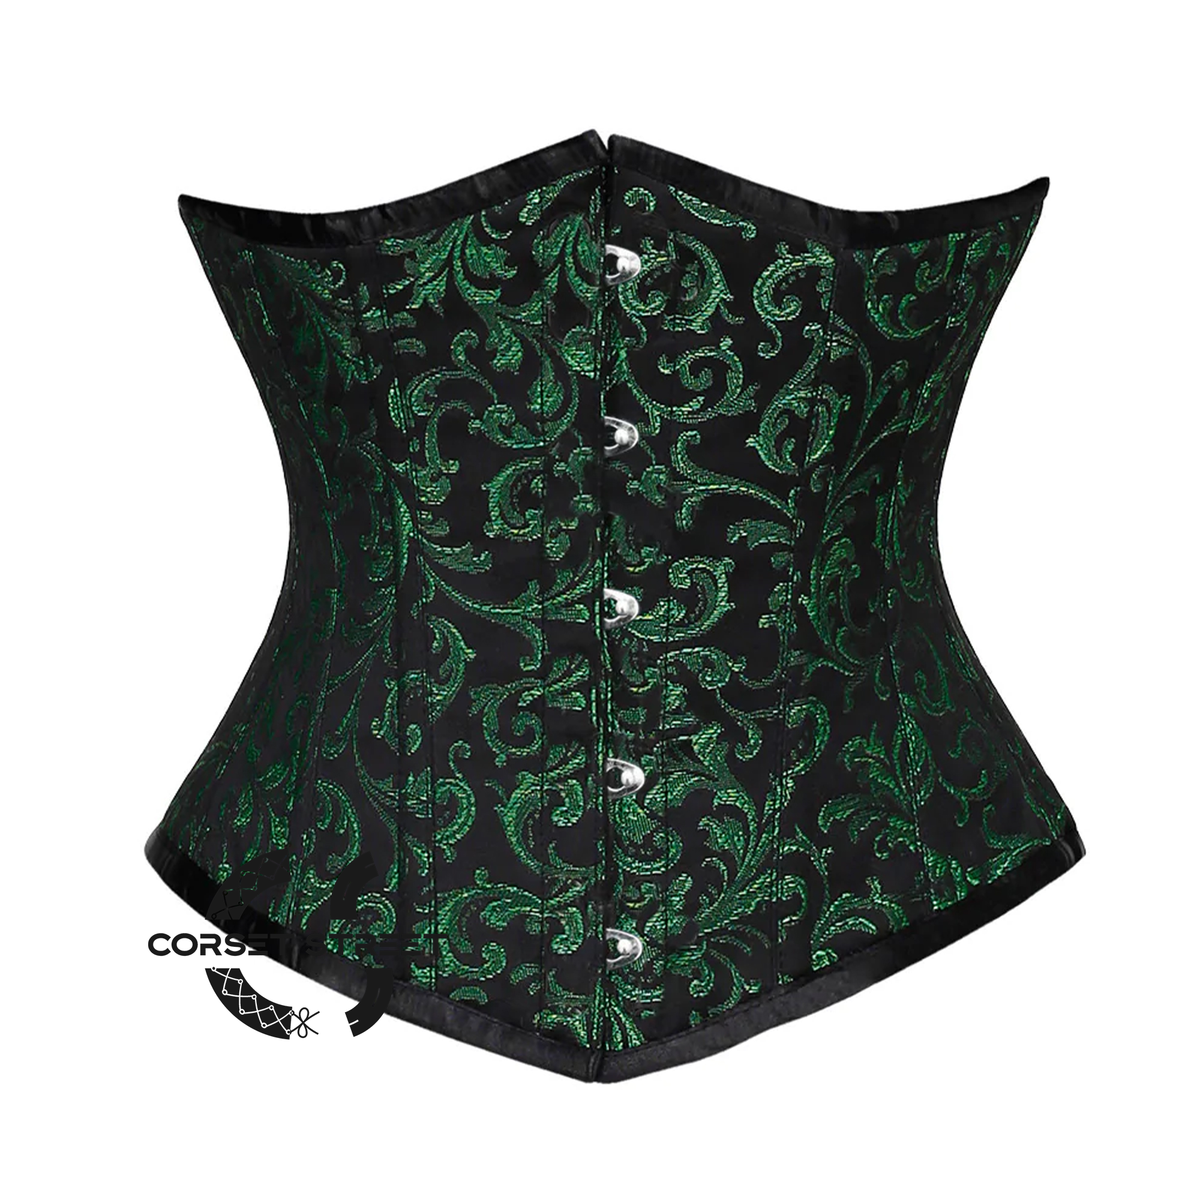 Green And Black Brocade With Front Silver Busk Underbust Corset Gothic Costume Bustier Top